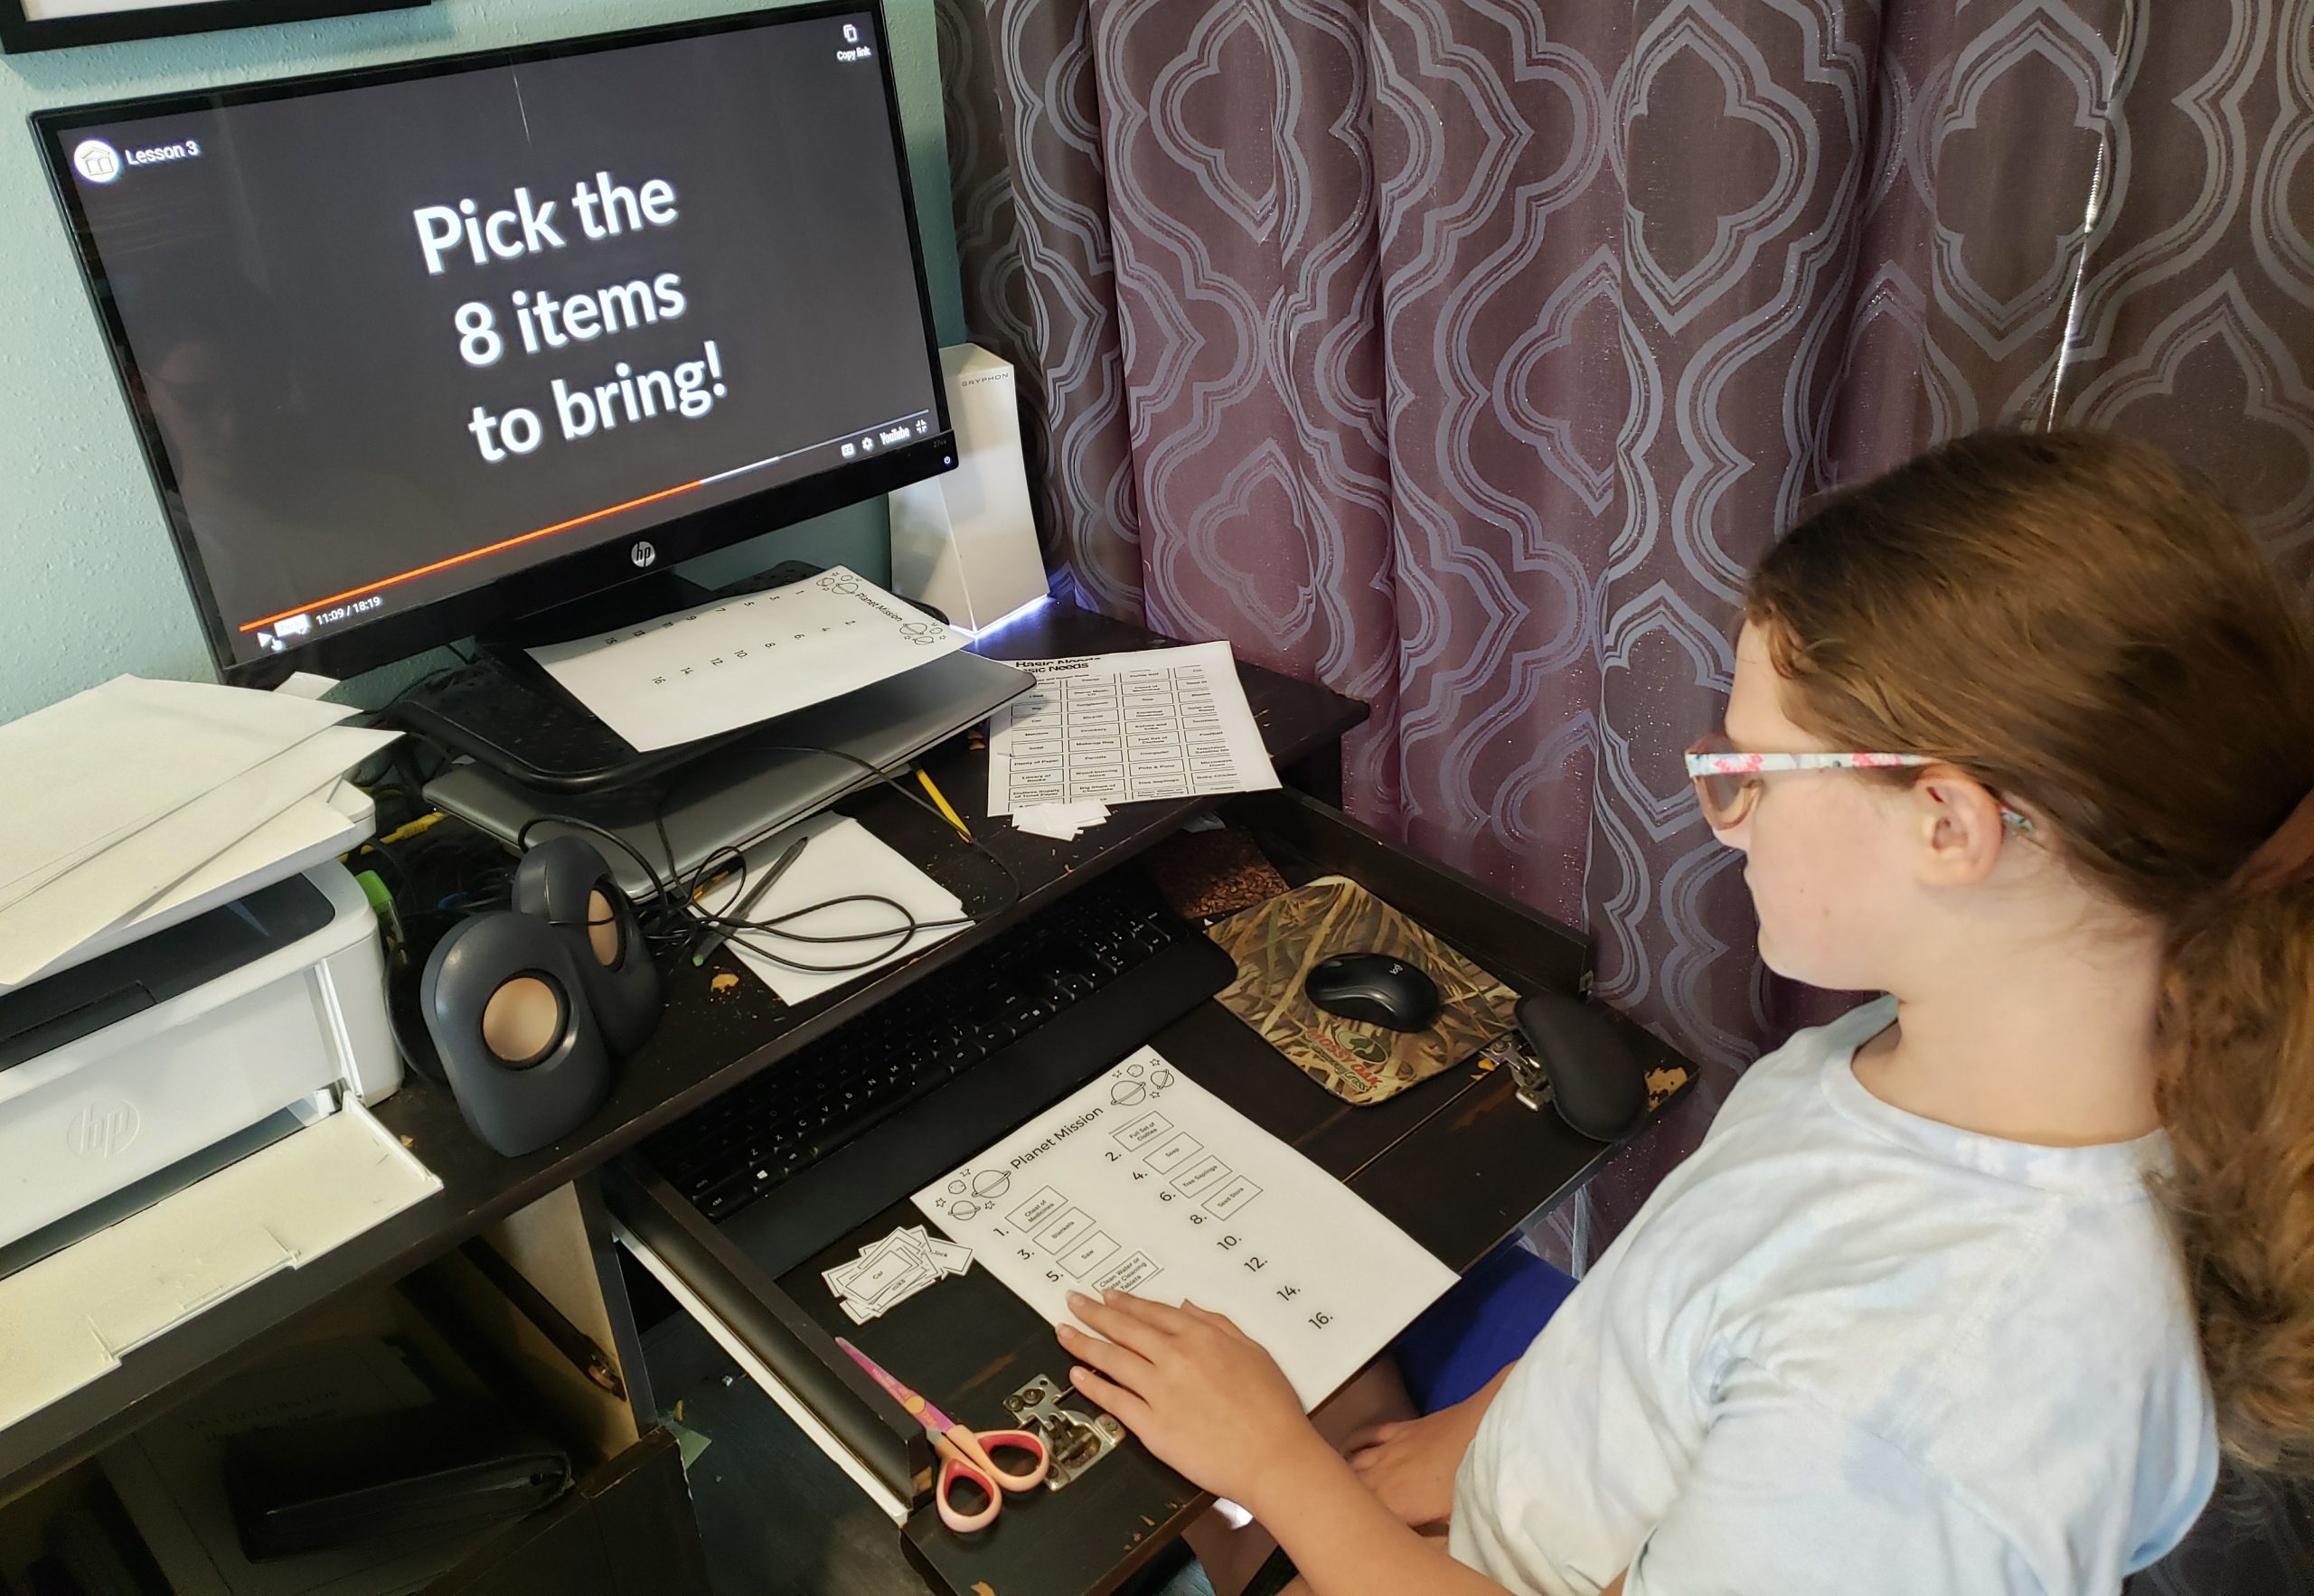 computer desk monitor says pick the 8 items to bring and girl is placing each item on a numbered list